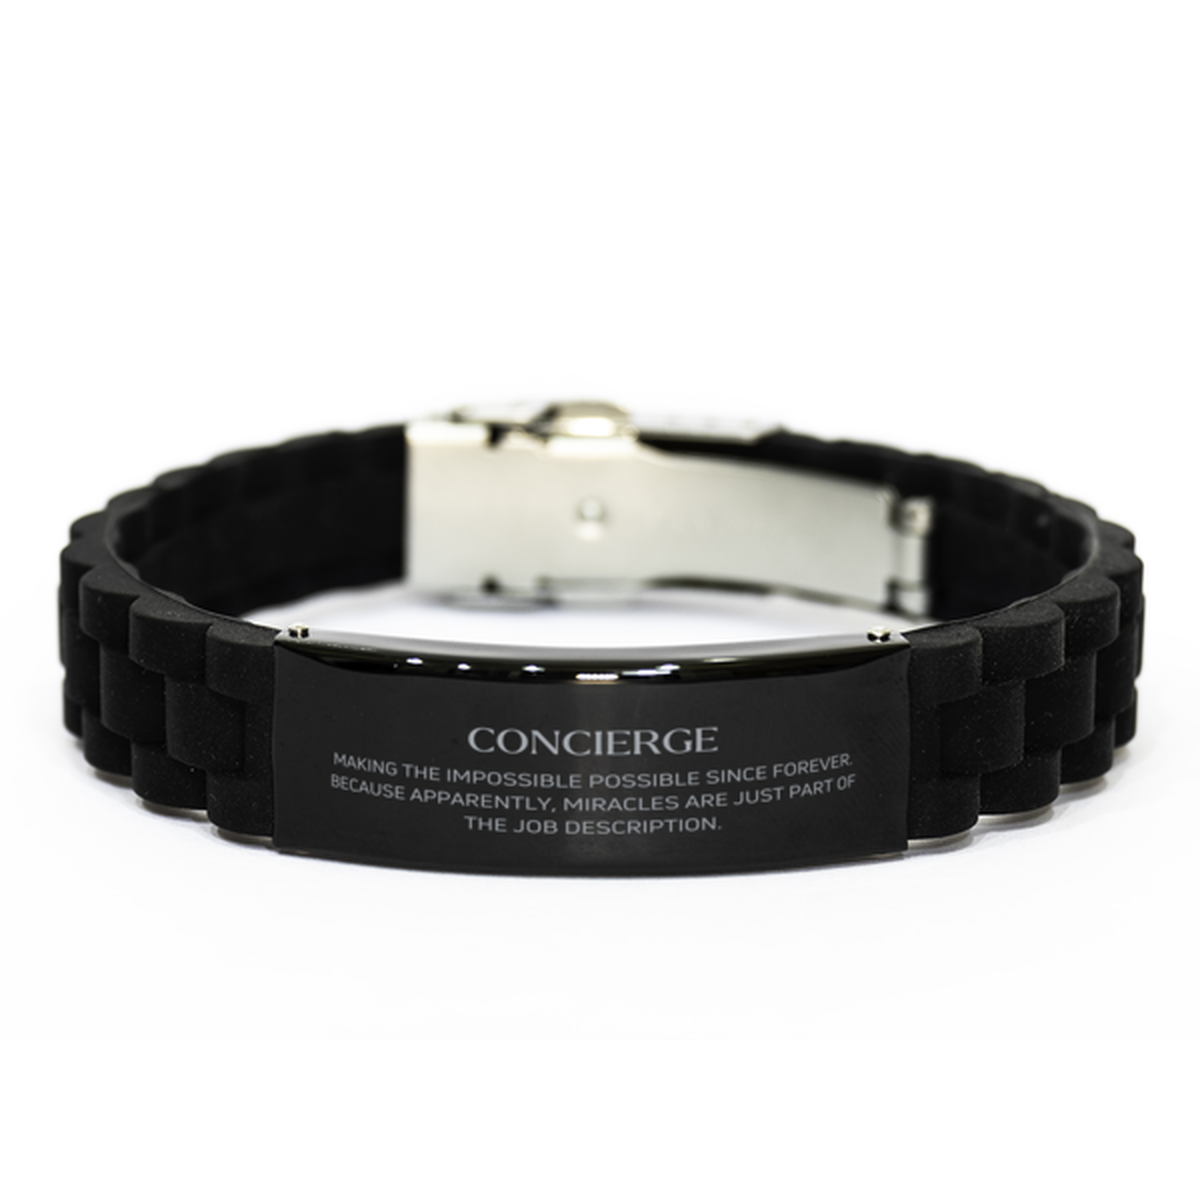 Funny Concierge Gifts, Miracles are just part of the job description, Inspirational Birthday Black Glidelock Clasp Bracelet For Concierge, Men, Women, Coworkers, Friends, Boss